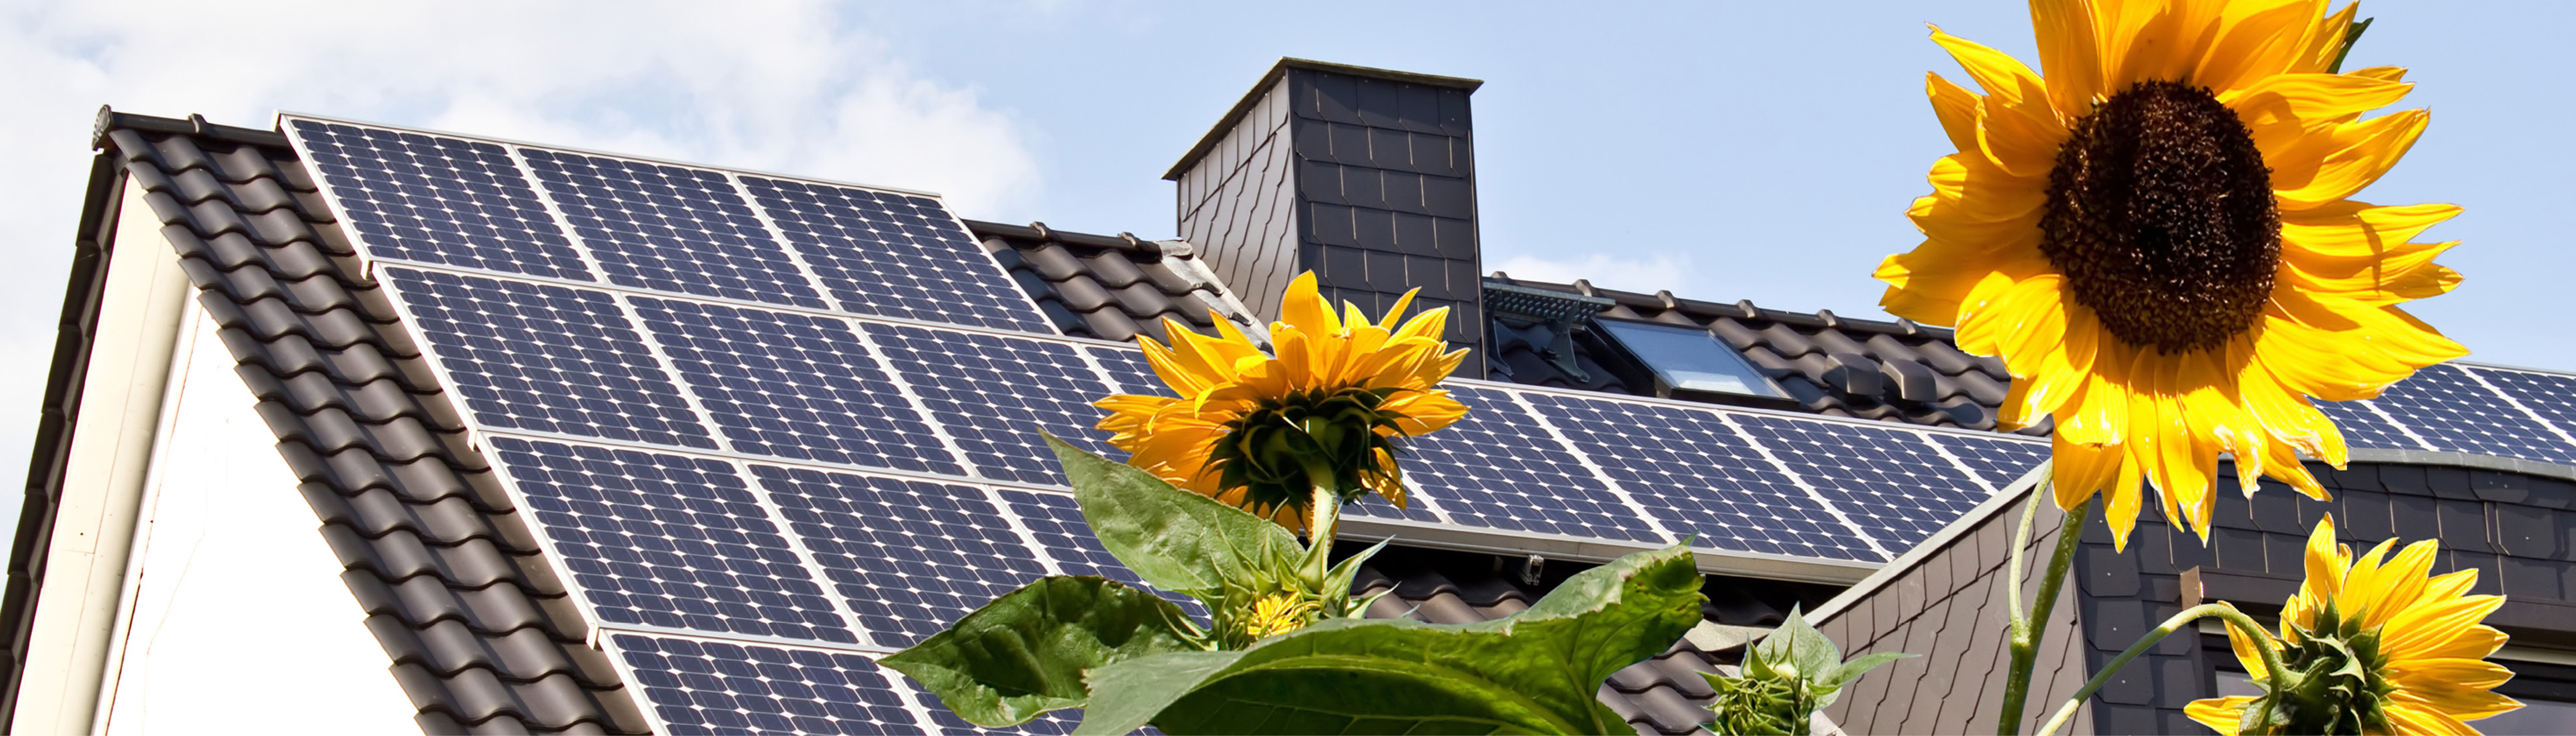 Sunflower with Solar Panels in the background atop a home